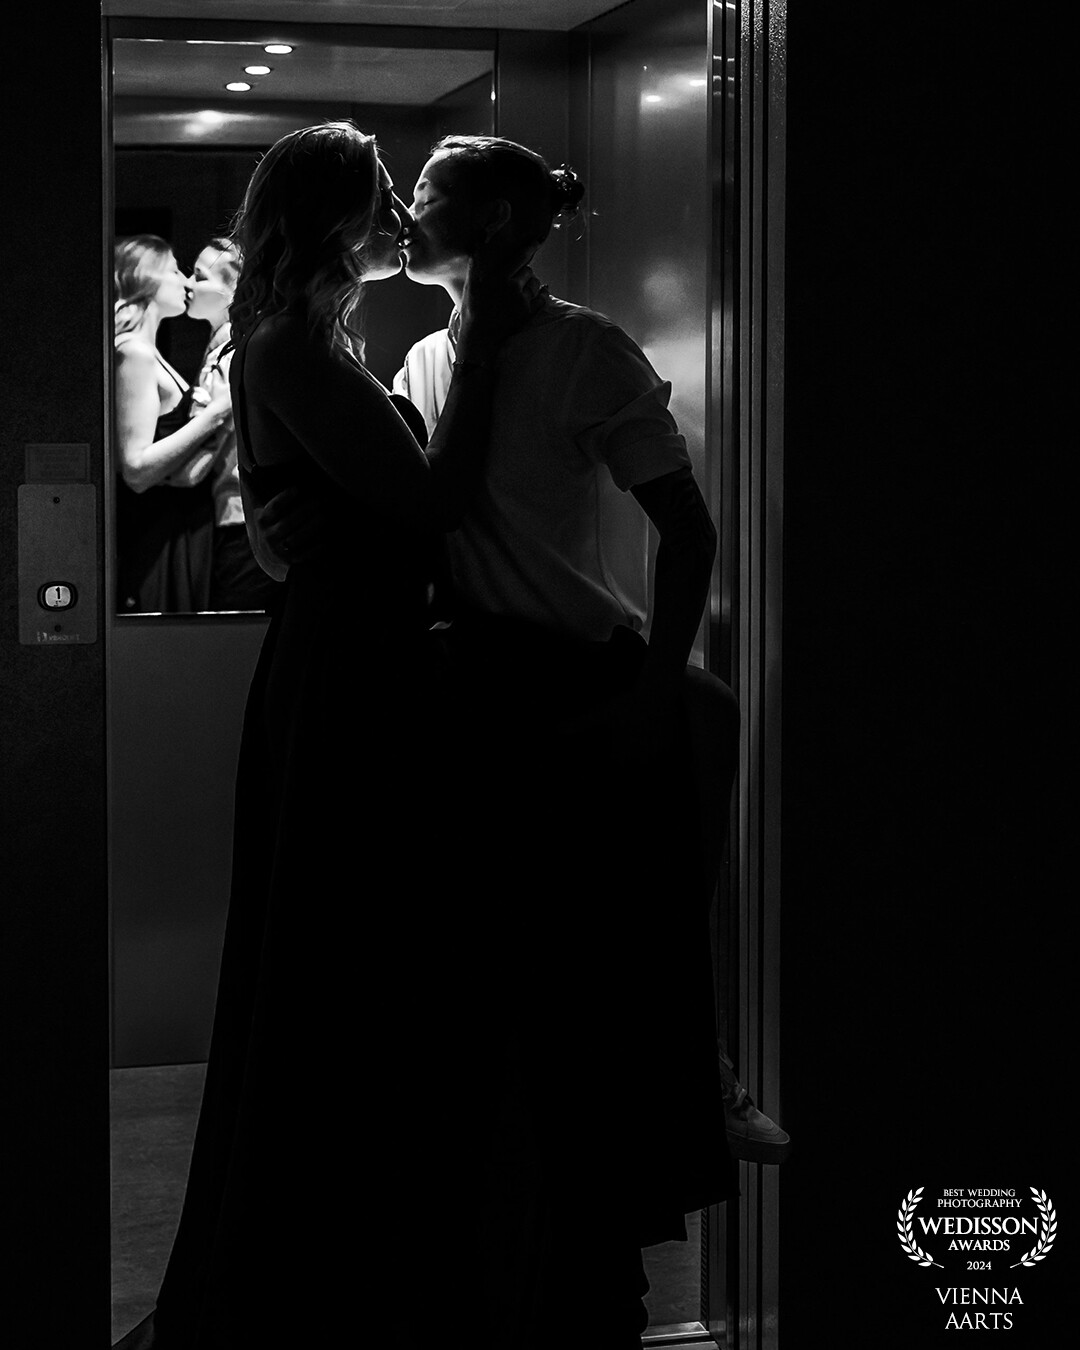 During the engagement shoot of this beautiful couple, there wish was to be secretly captured kissing in the elevator.